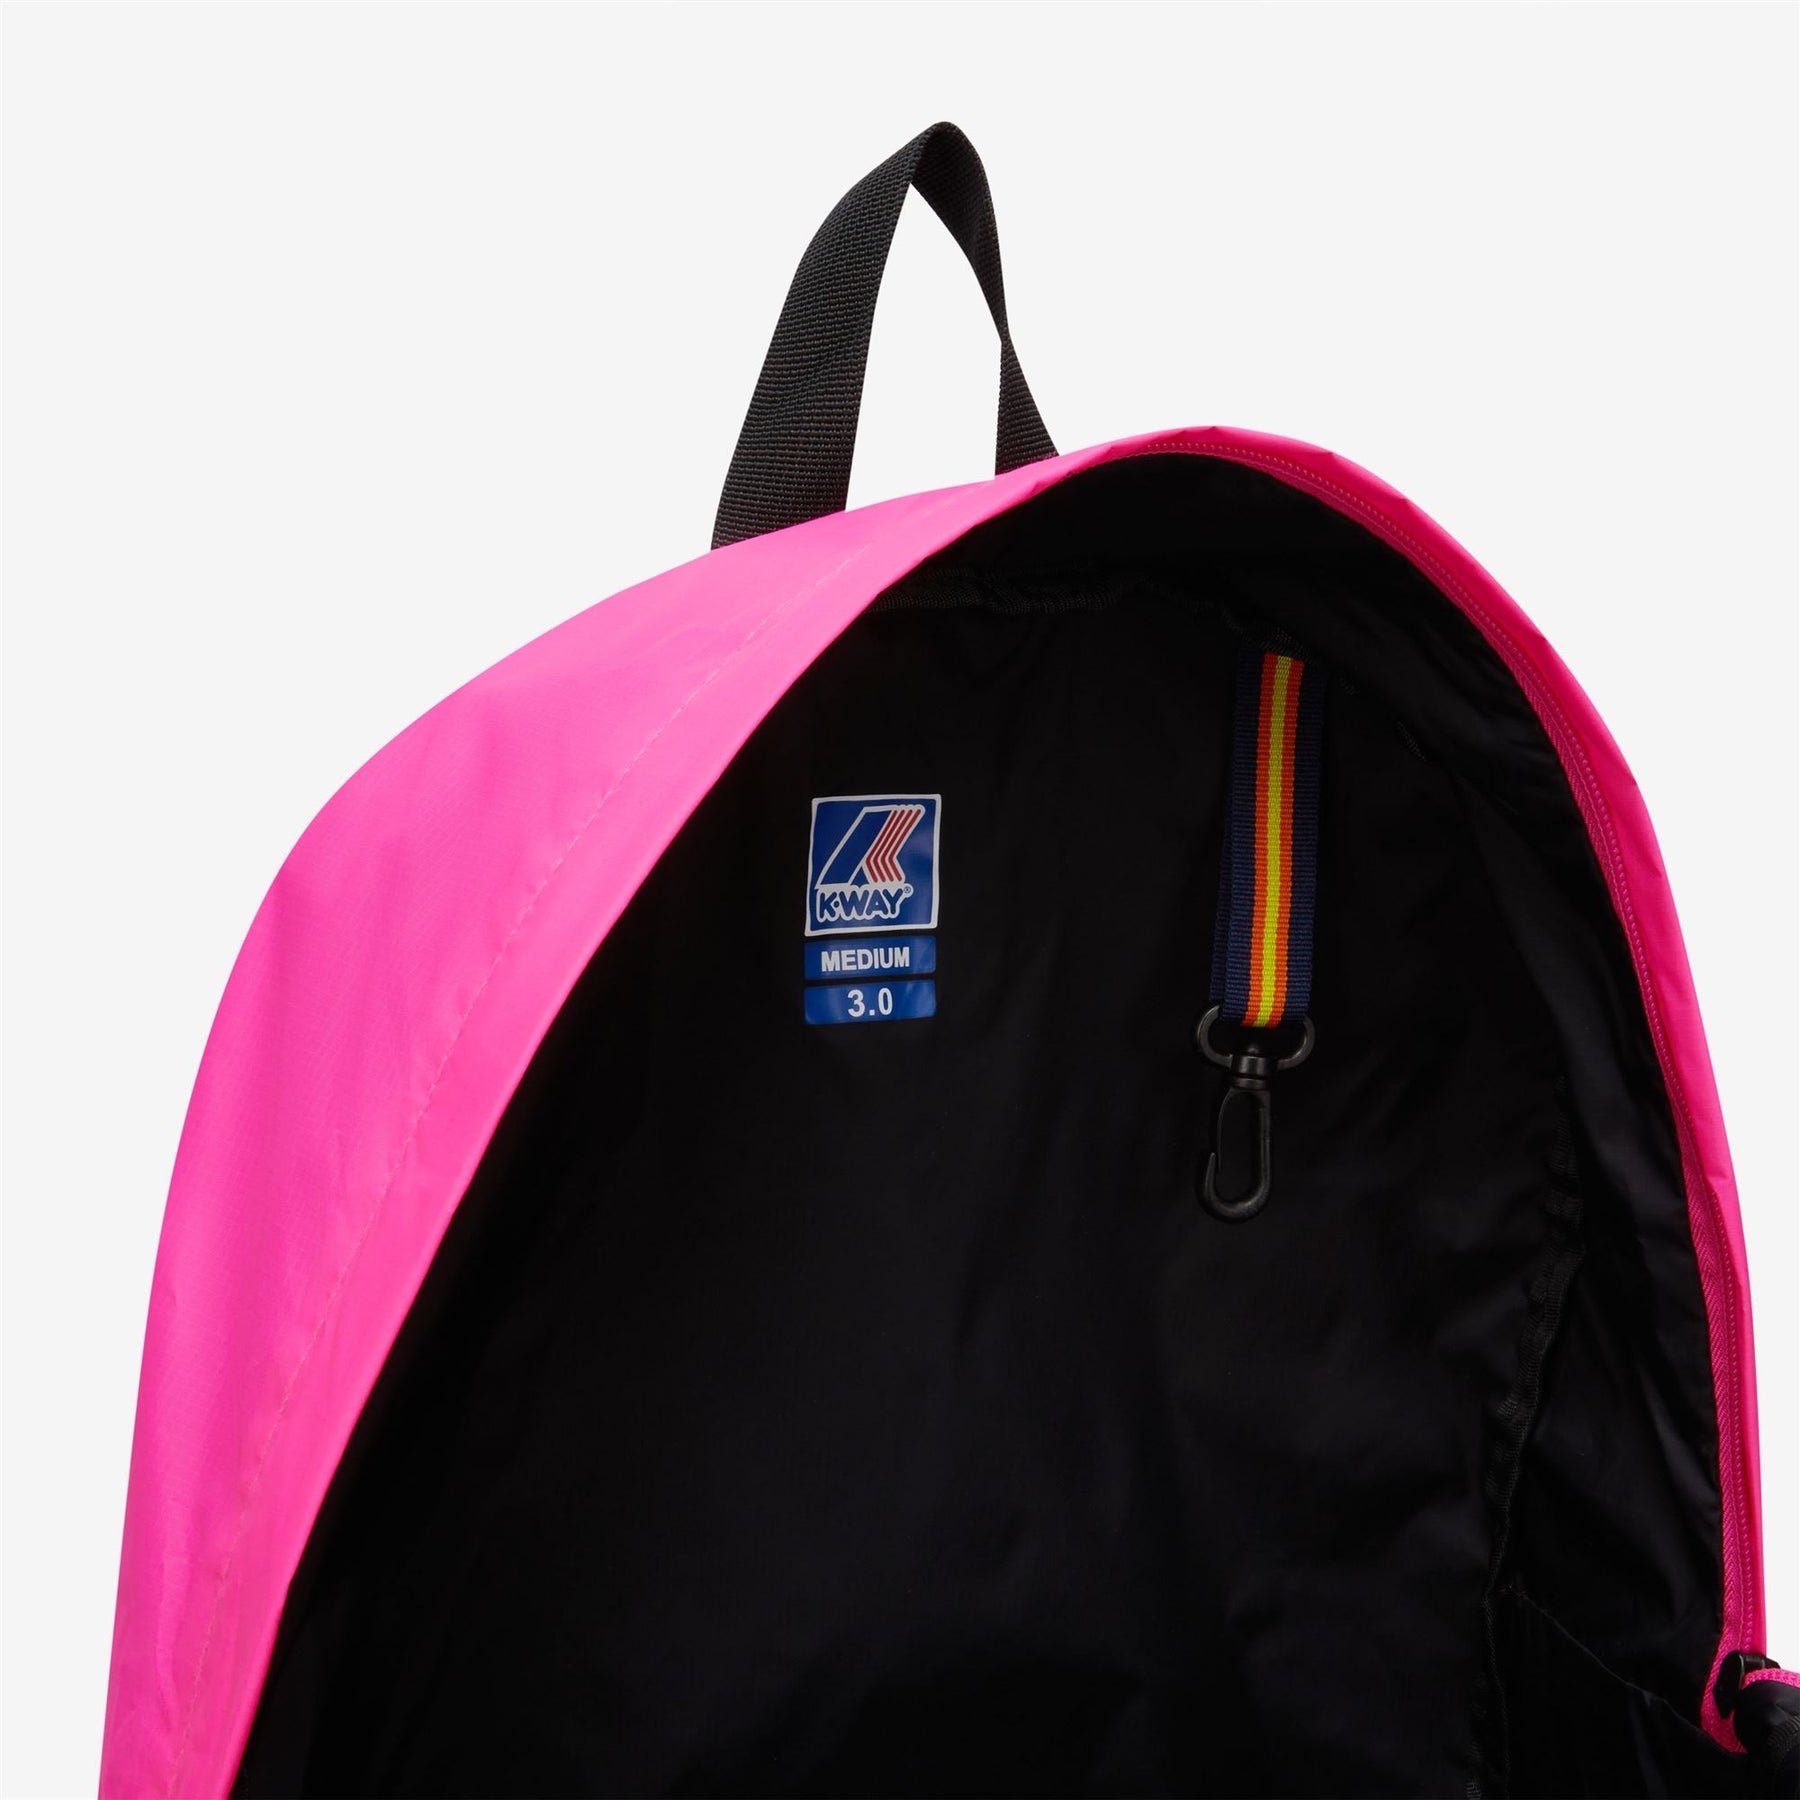 Francois - Packable Ripstop Backpack in Pink Intense